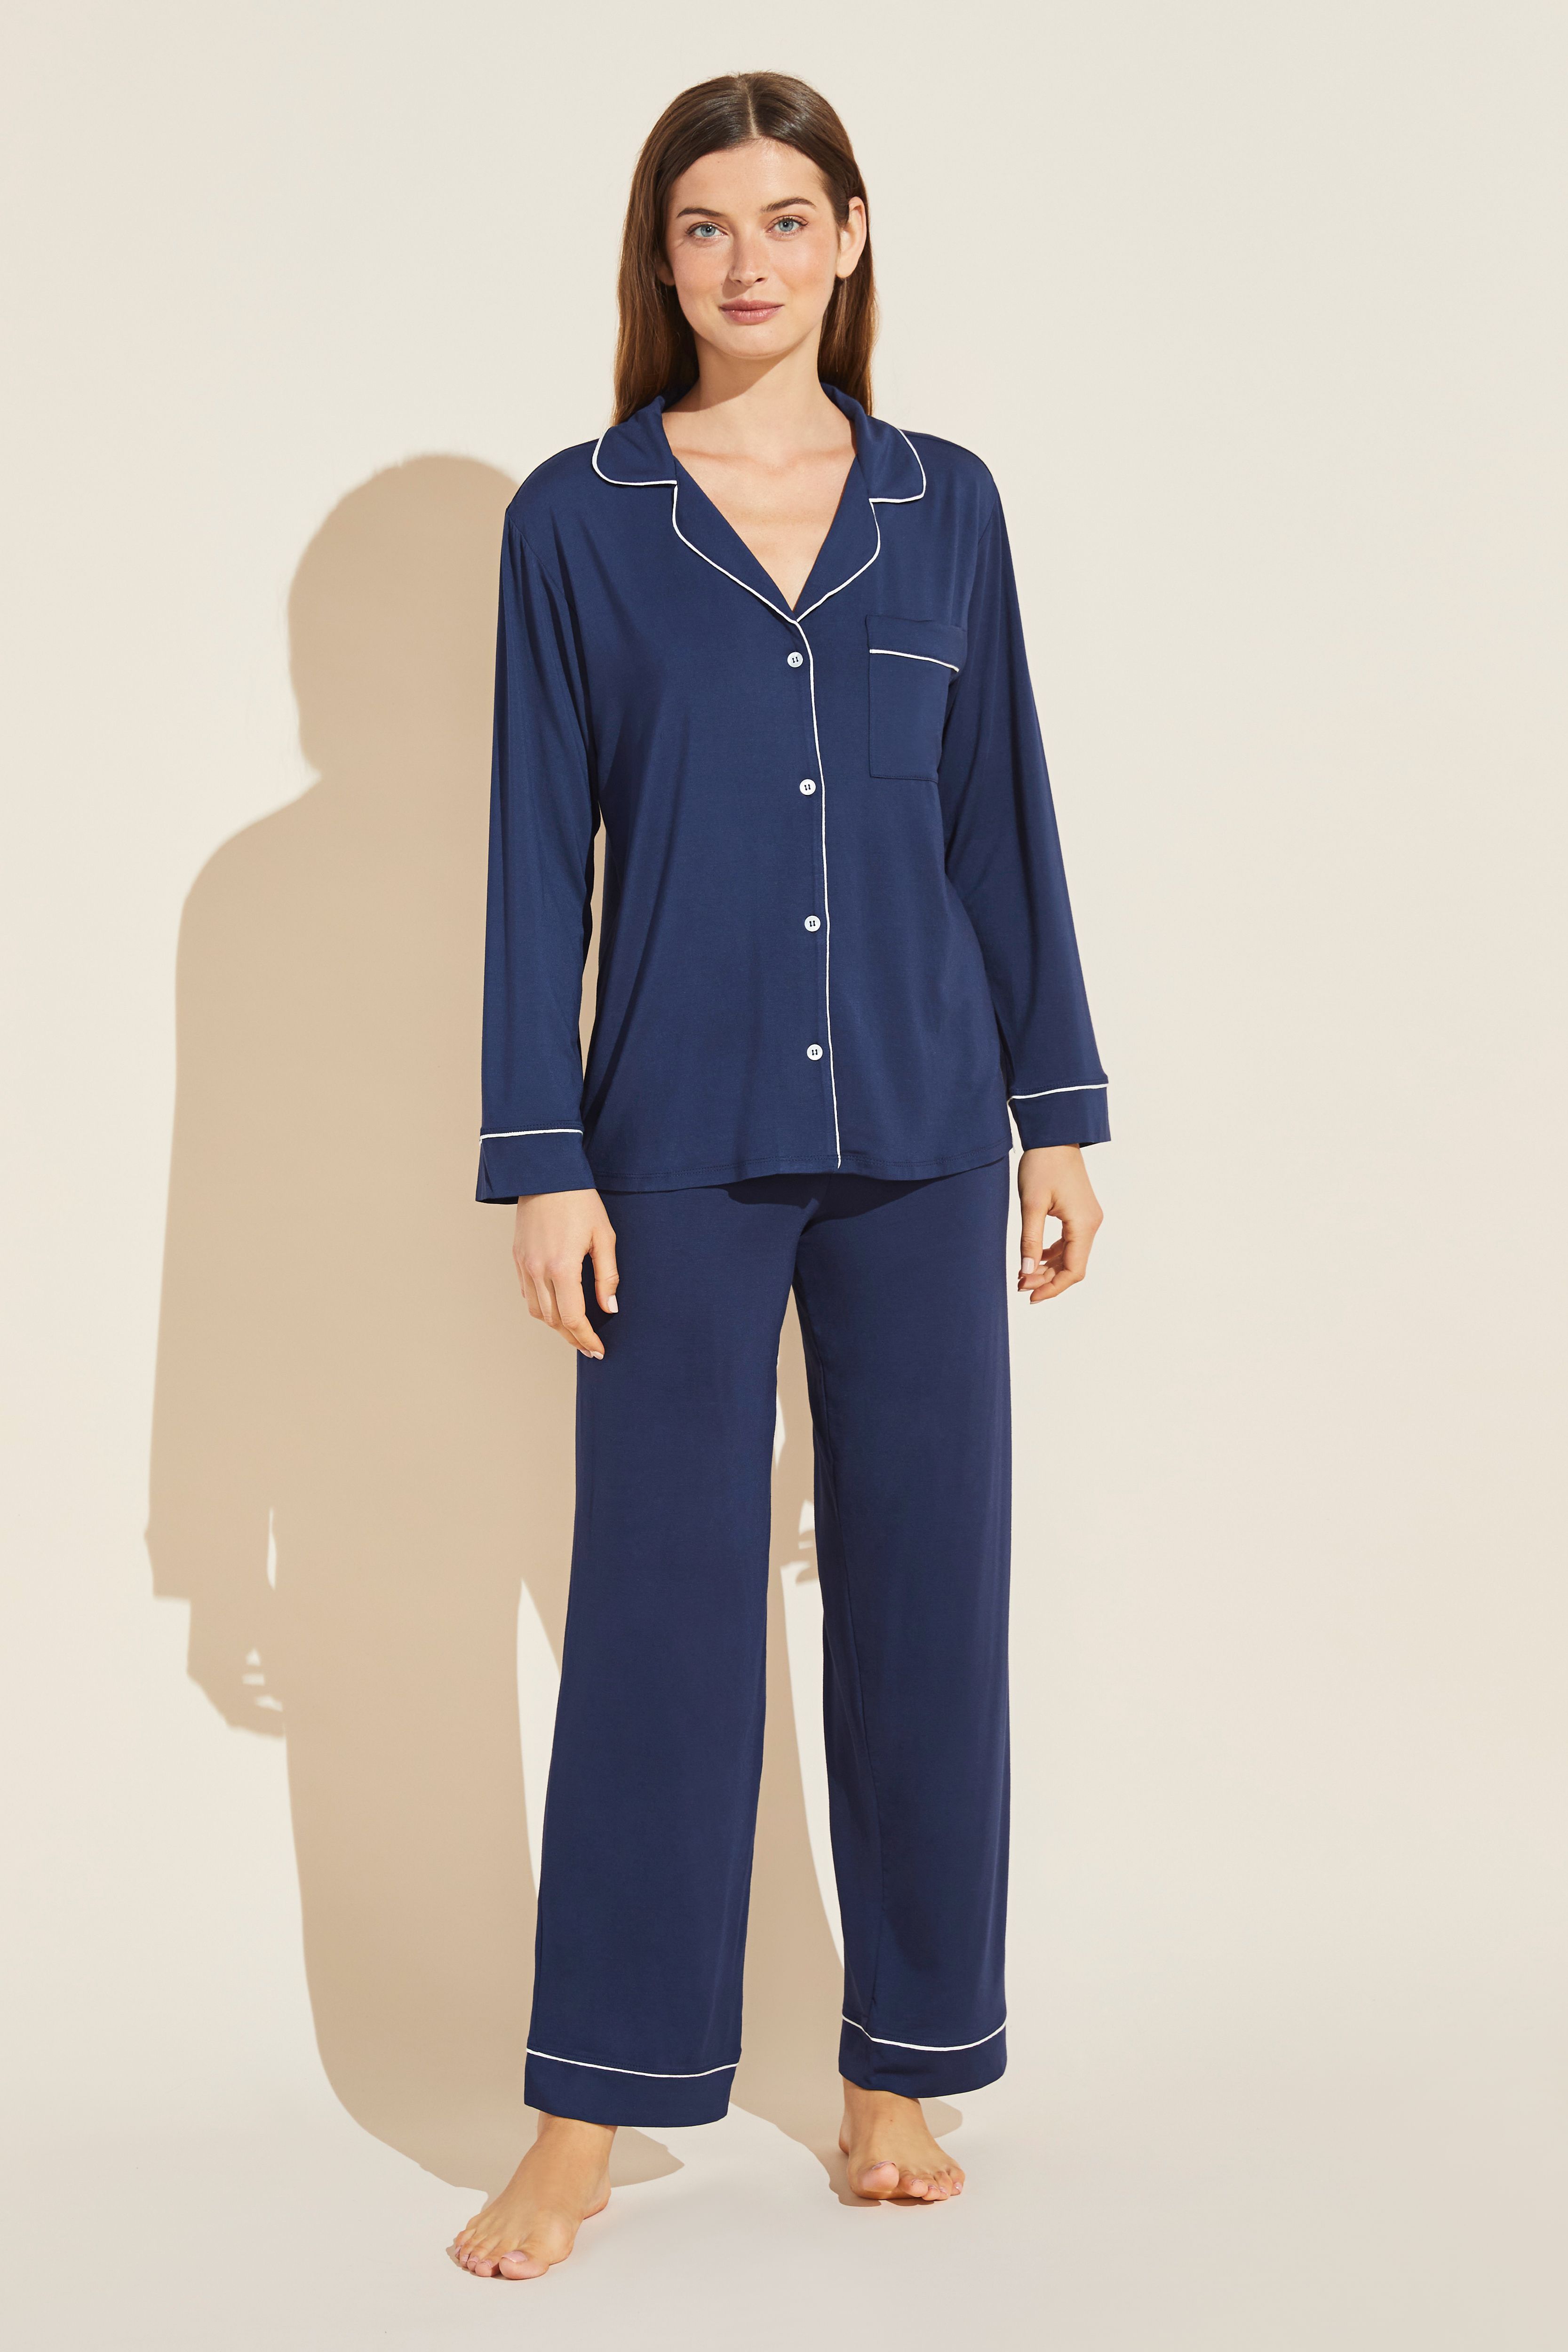 26 Best Pajamas for Women In 2023 - Most Comfortable PJs